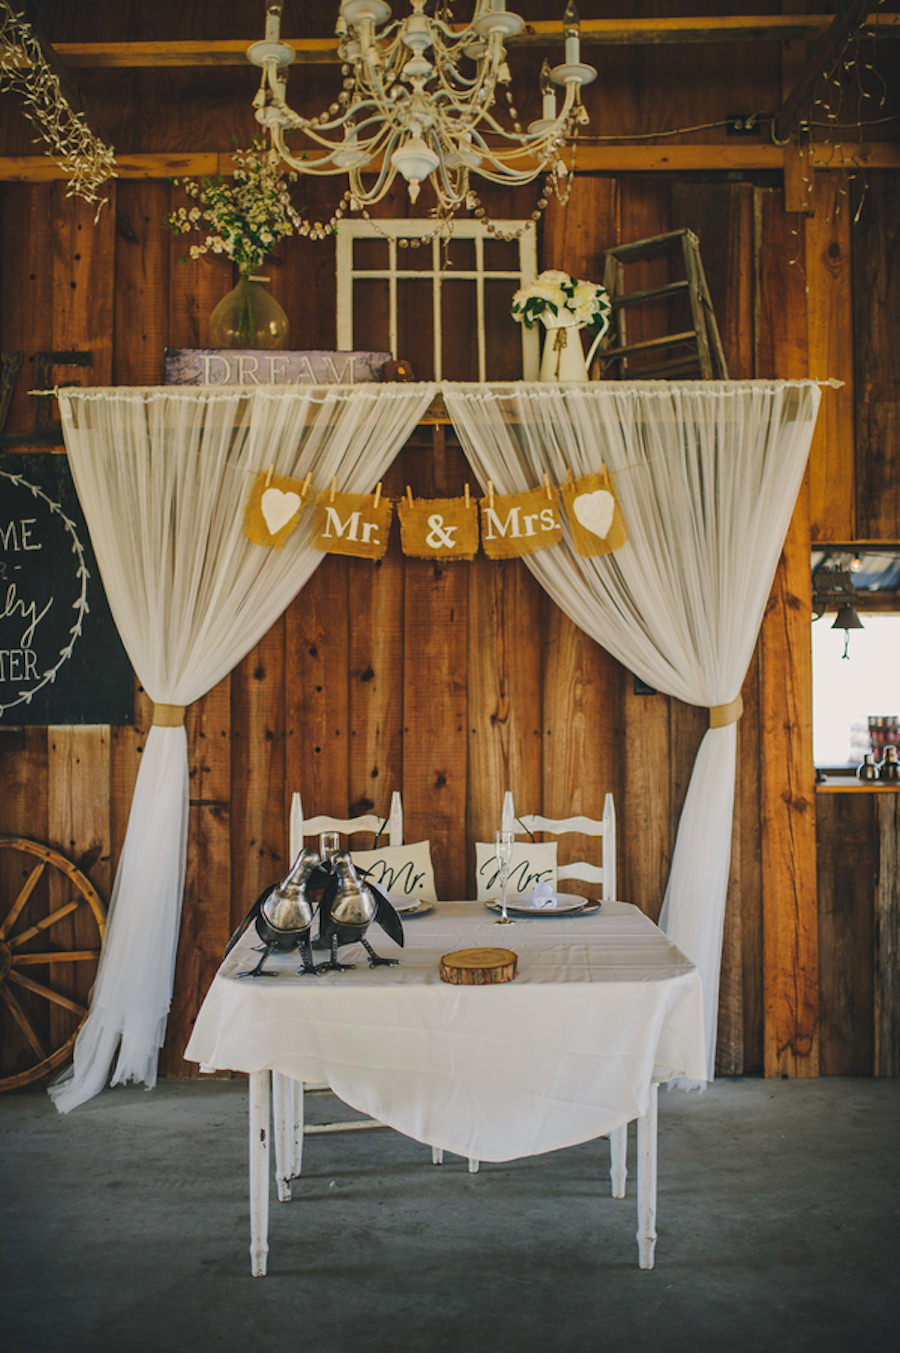 Plant City, Indoor Barn Wedding Reception Sweetheart Table with Wooden Table and Chairs, Draped Ivory Fabric Backdrop Draping and Burlap Mr and Mrs Sign